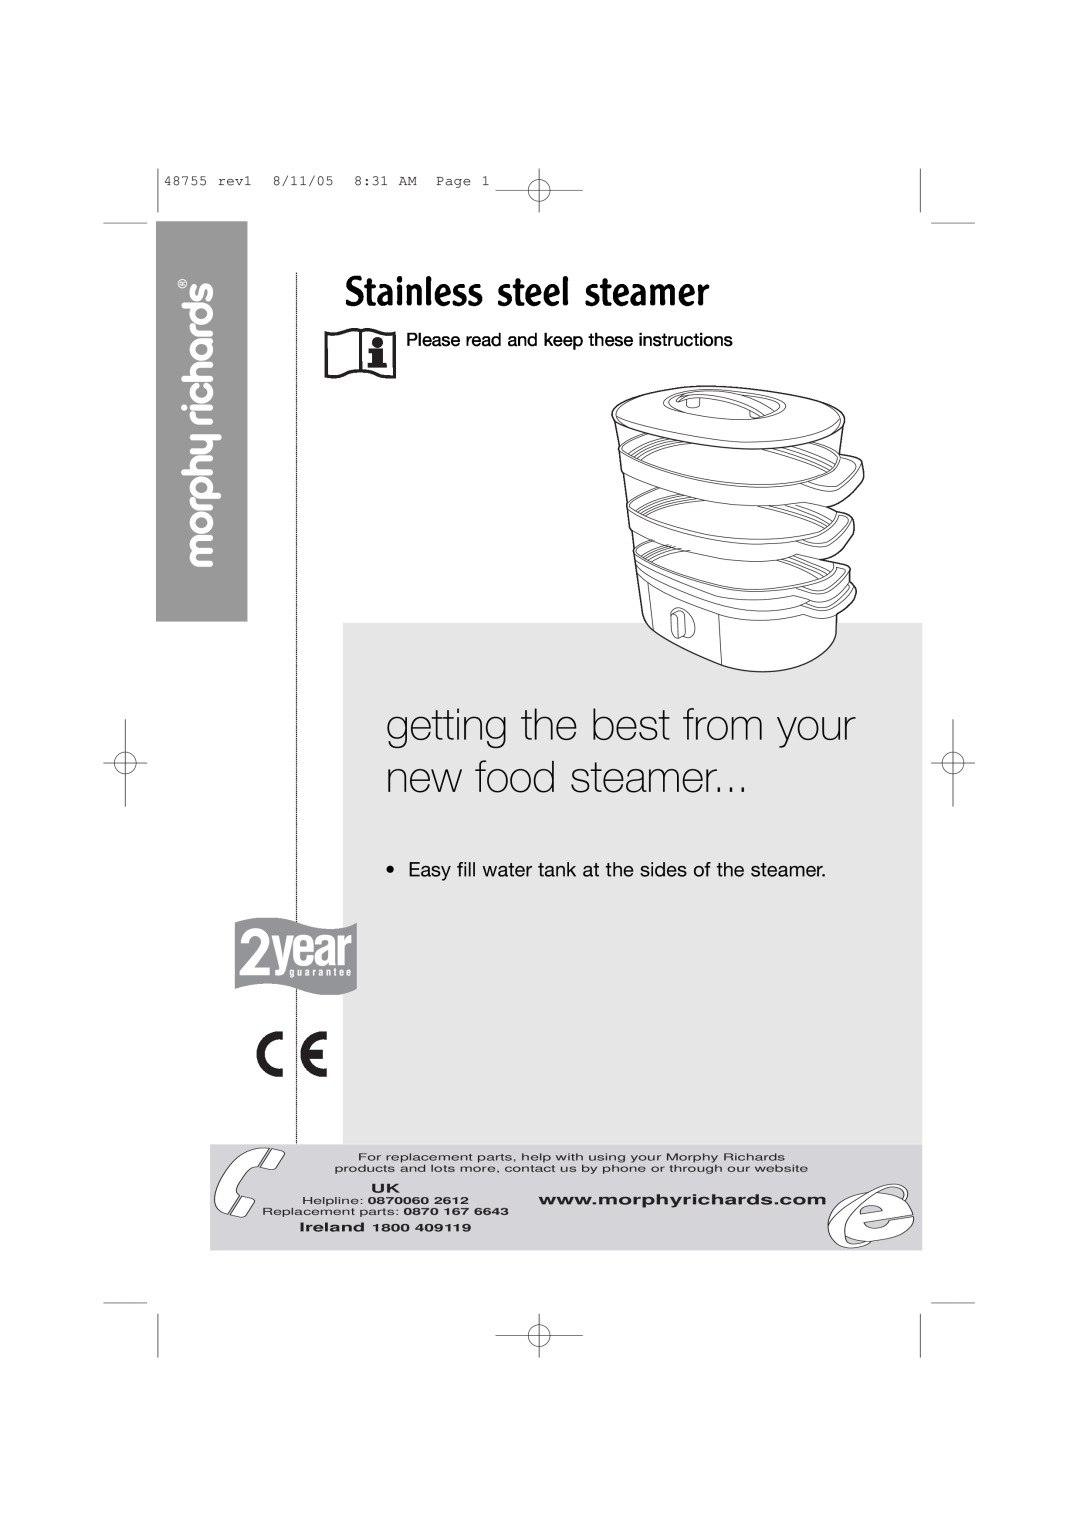 Morphy Richards Stainless steel steamer manual getting the best from your new food steamer, Ireland, Helpline, 6643 